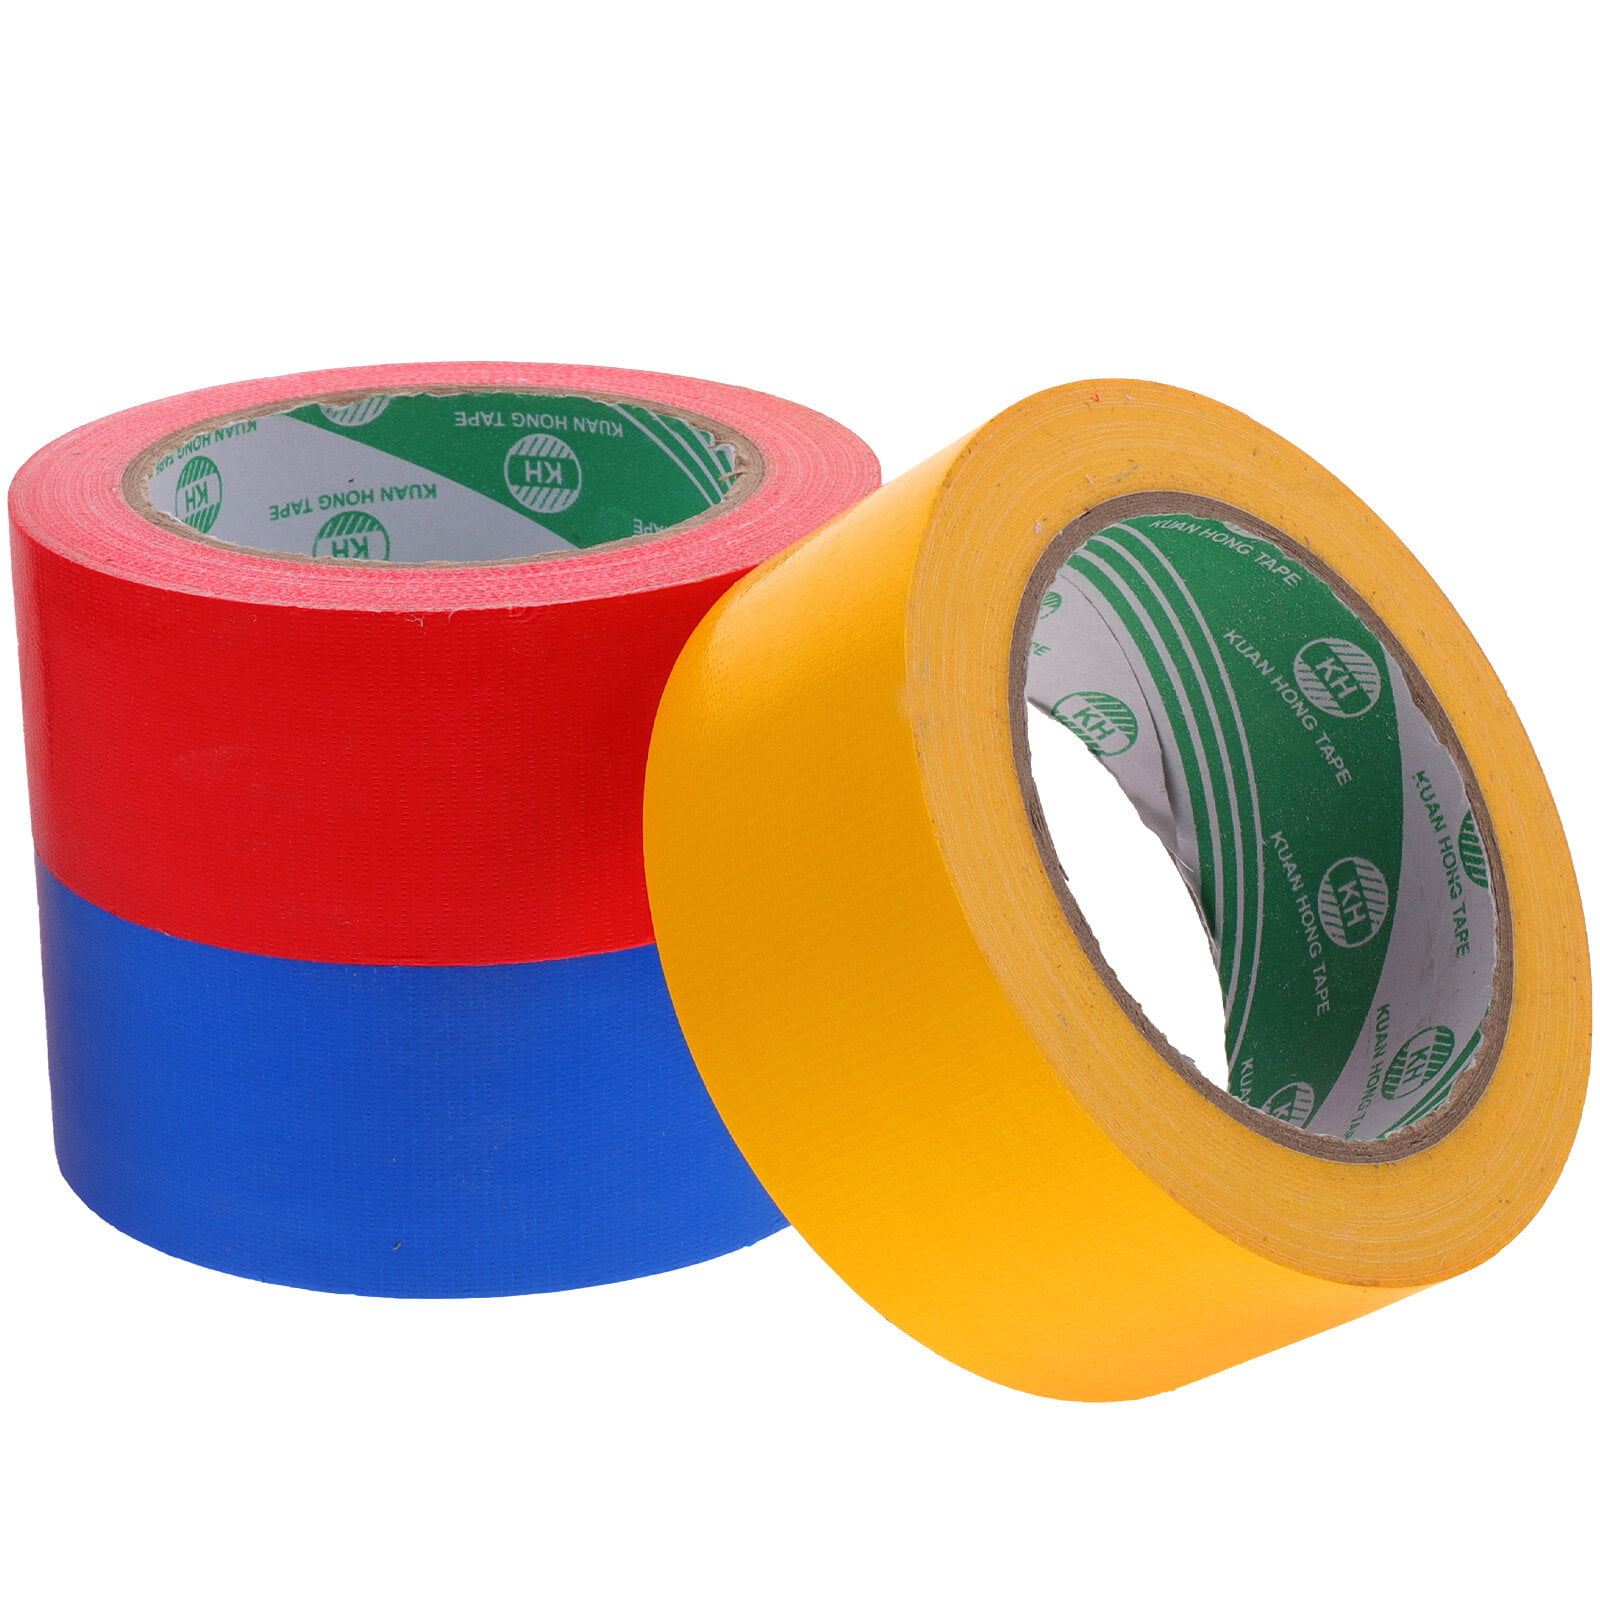 3/6/12Roll Holographic Washi Tape Craft Tape Set 20 Roll Wide Decorative Rainbow  Tape for Art, Scrapbook, Solid Wash Tape Kids Tape